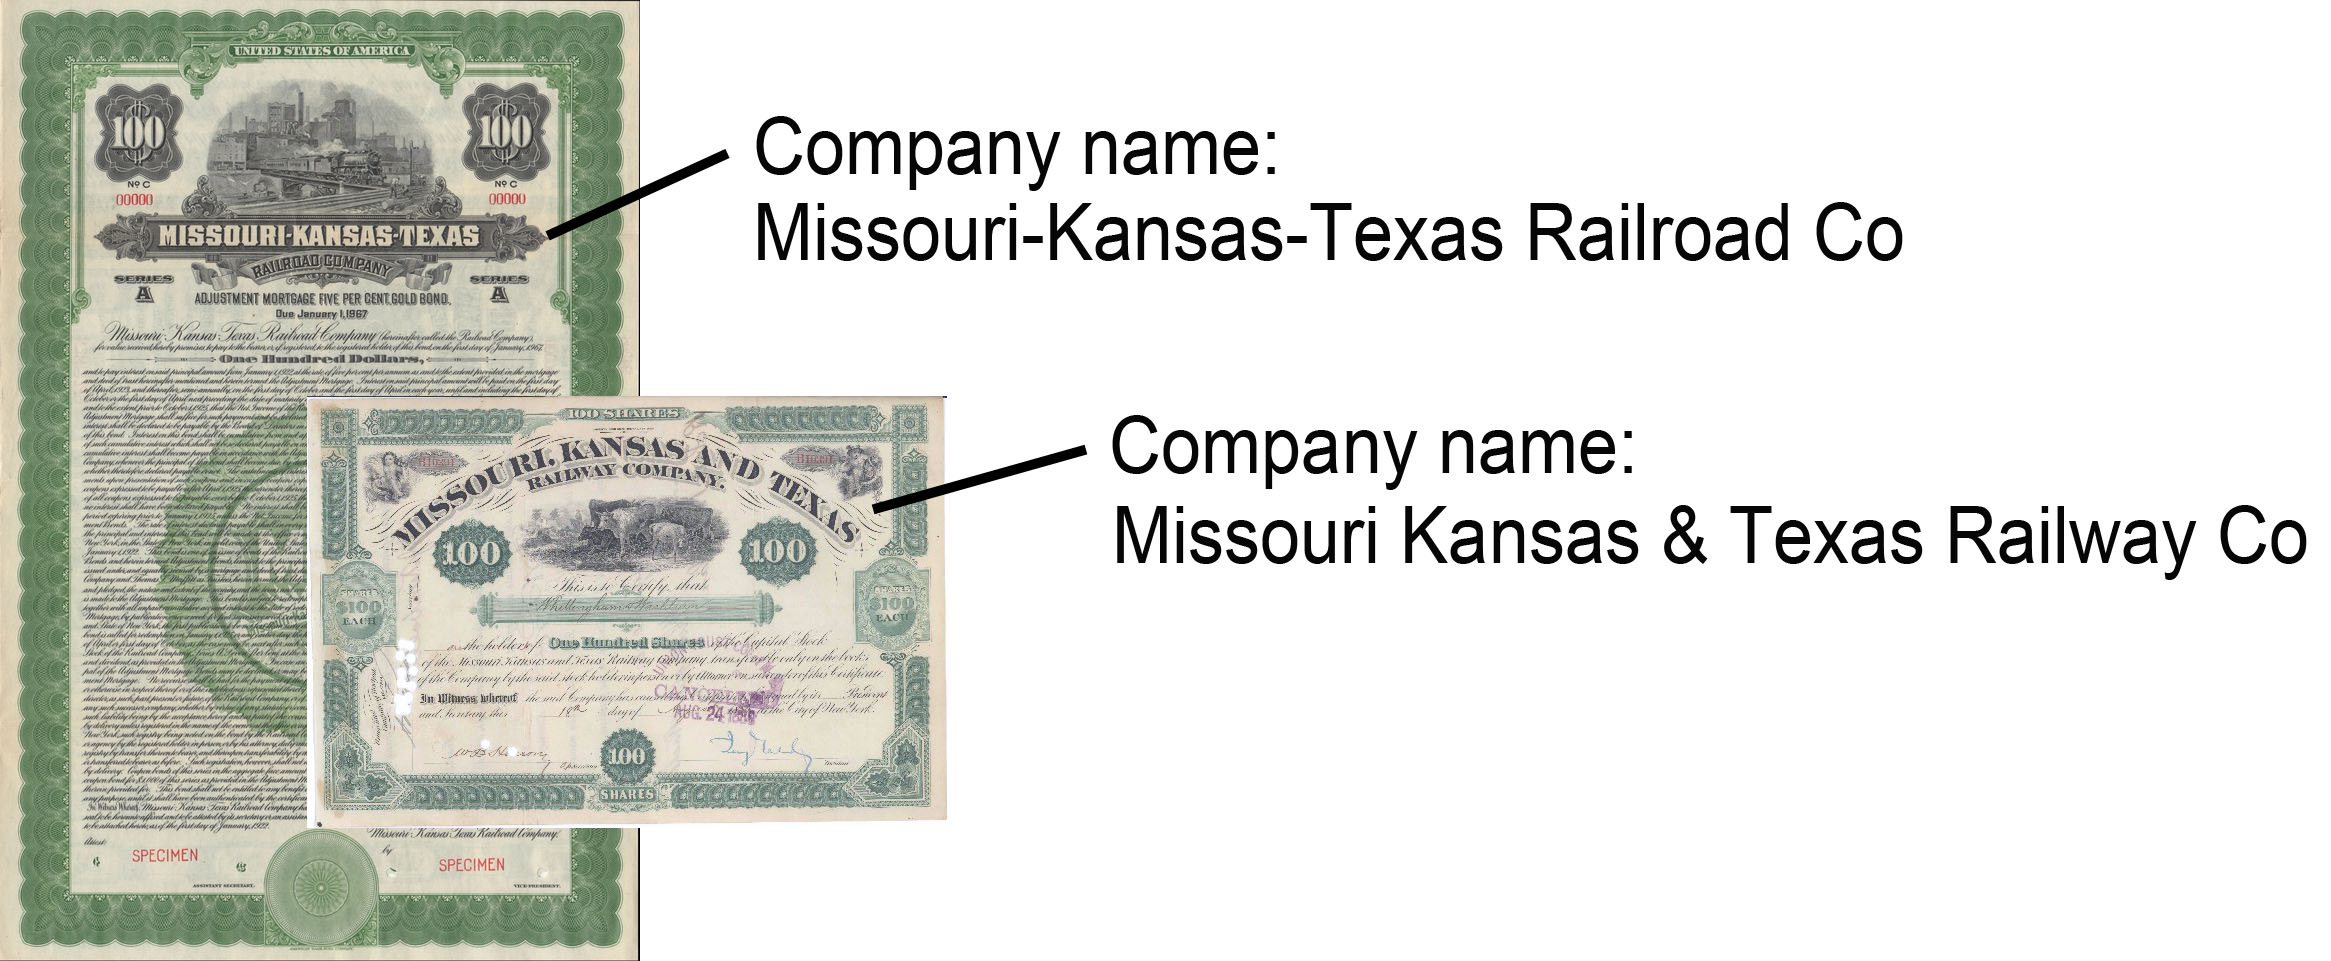 Example of company names on certificates